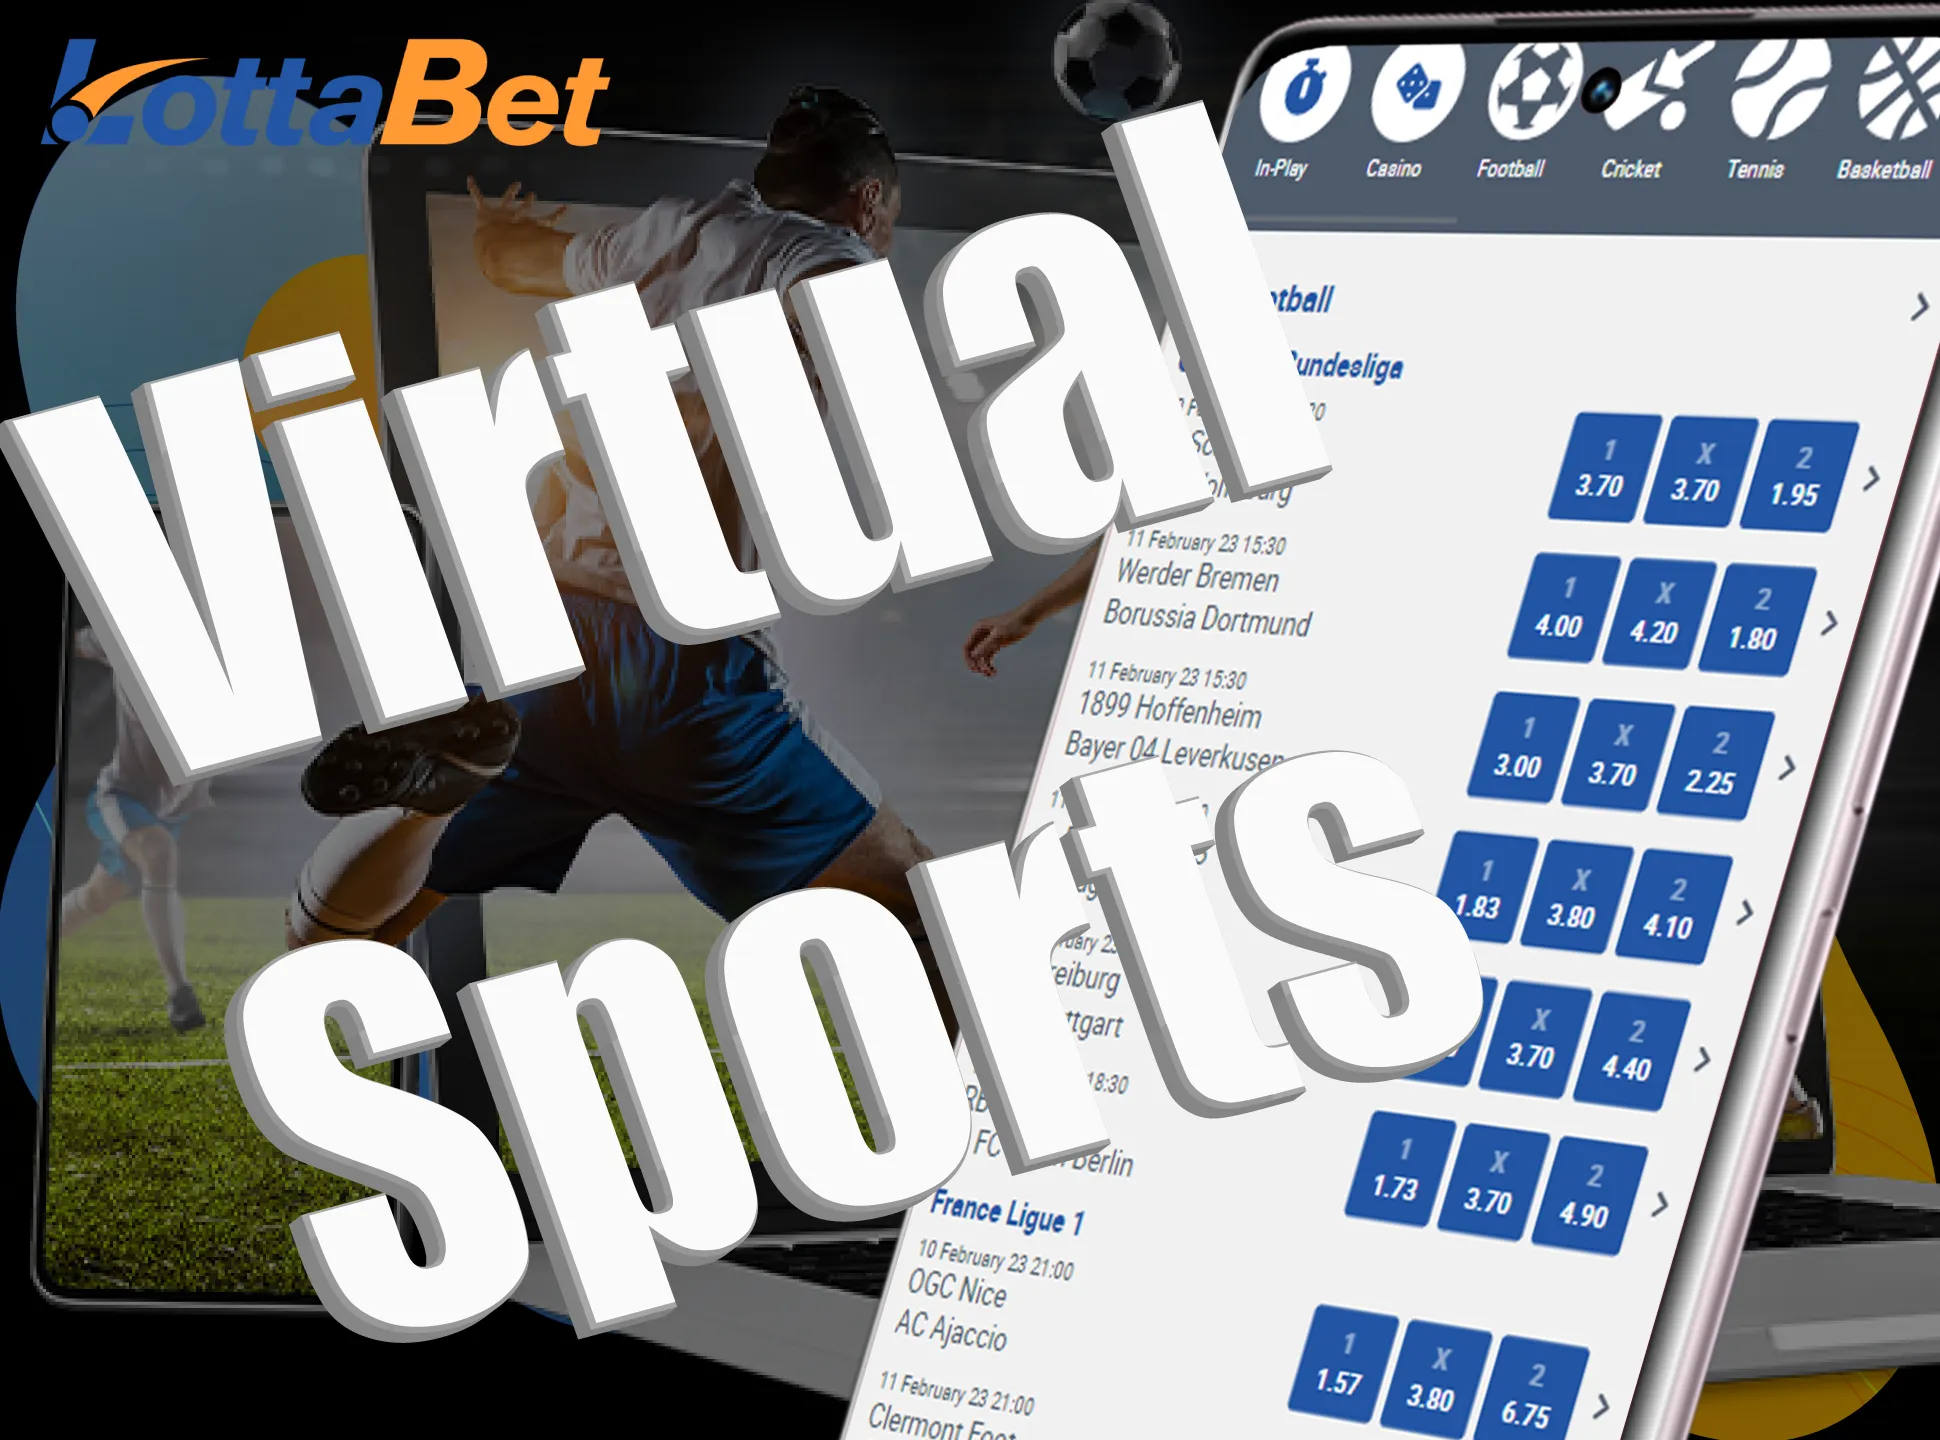 You can also bet on virtual football, tennis, cricket and other sports.